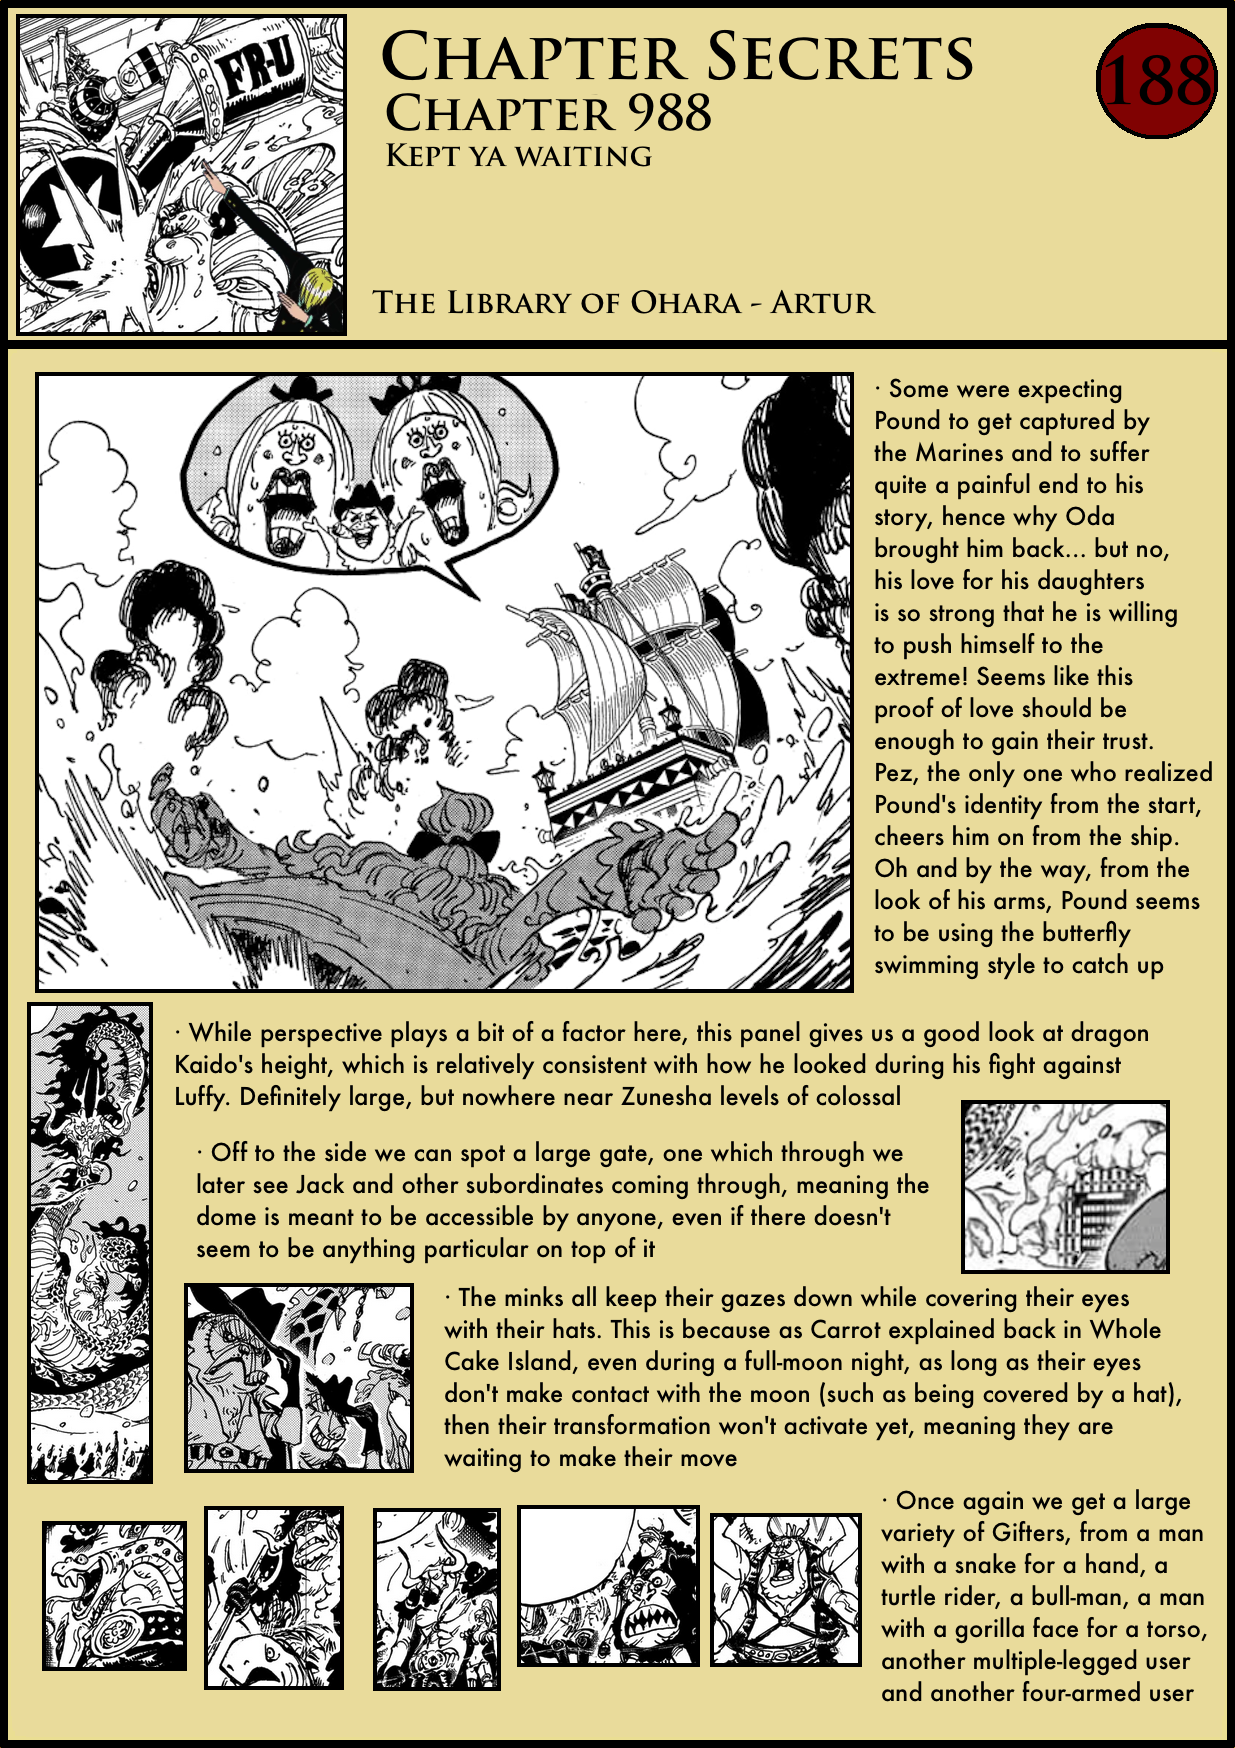 Chapter Secrets Chapter 9 In Depth Analysis The Library Of Ohara